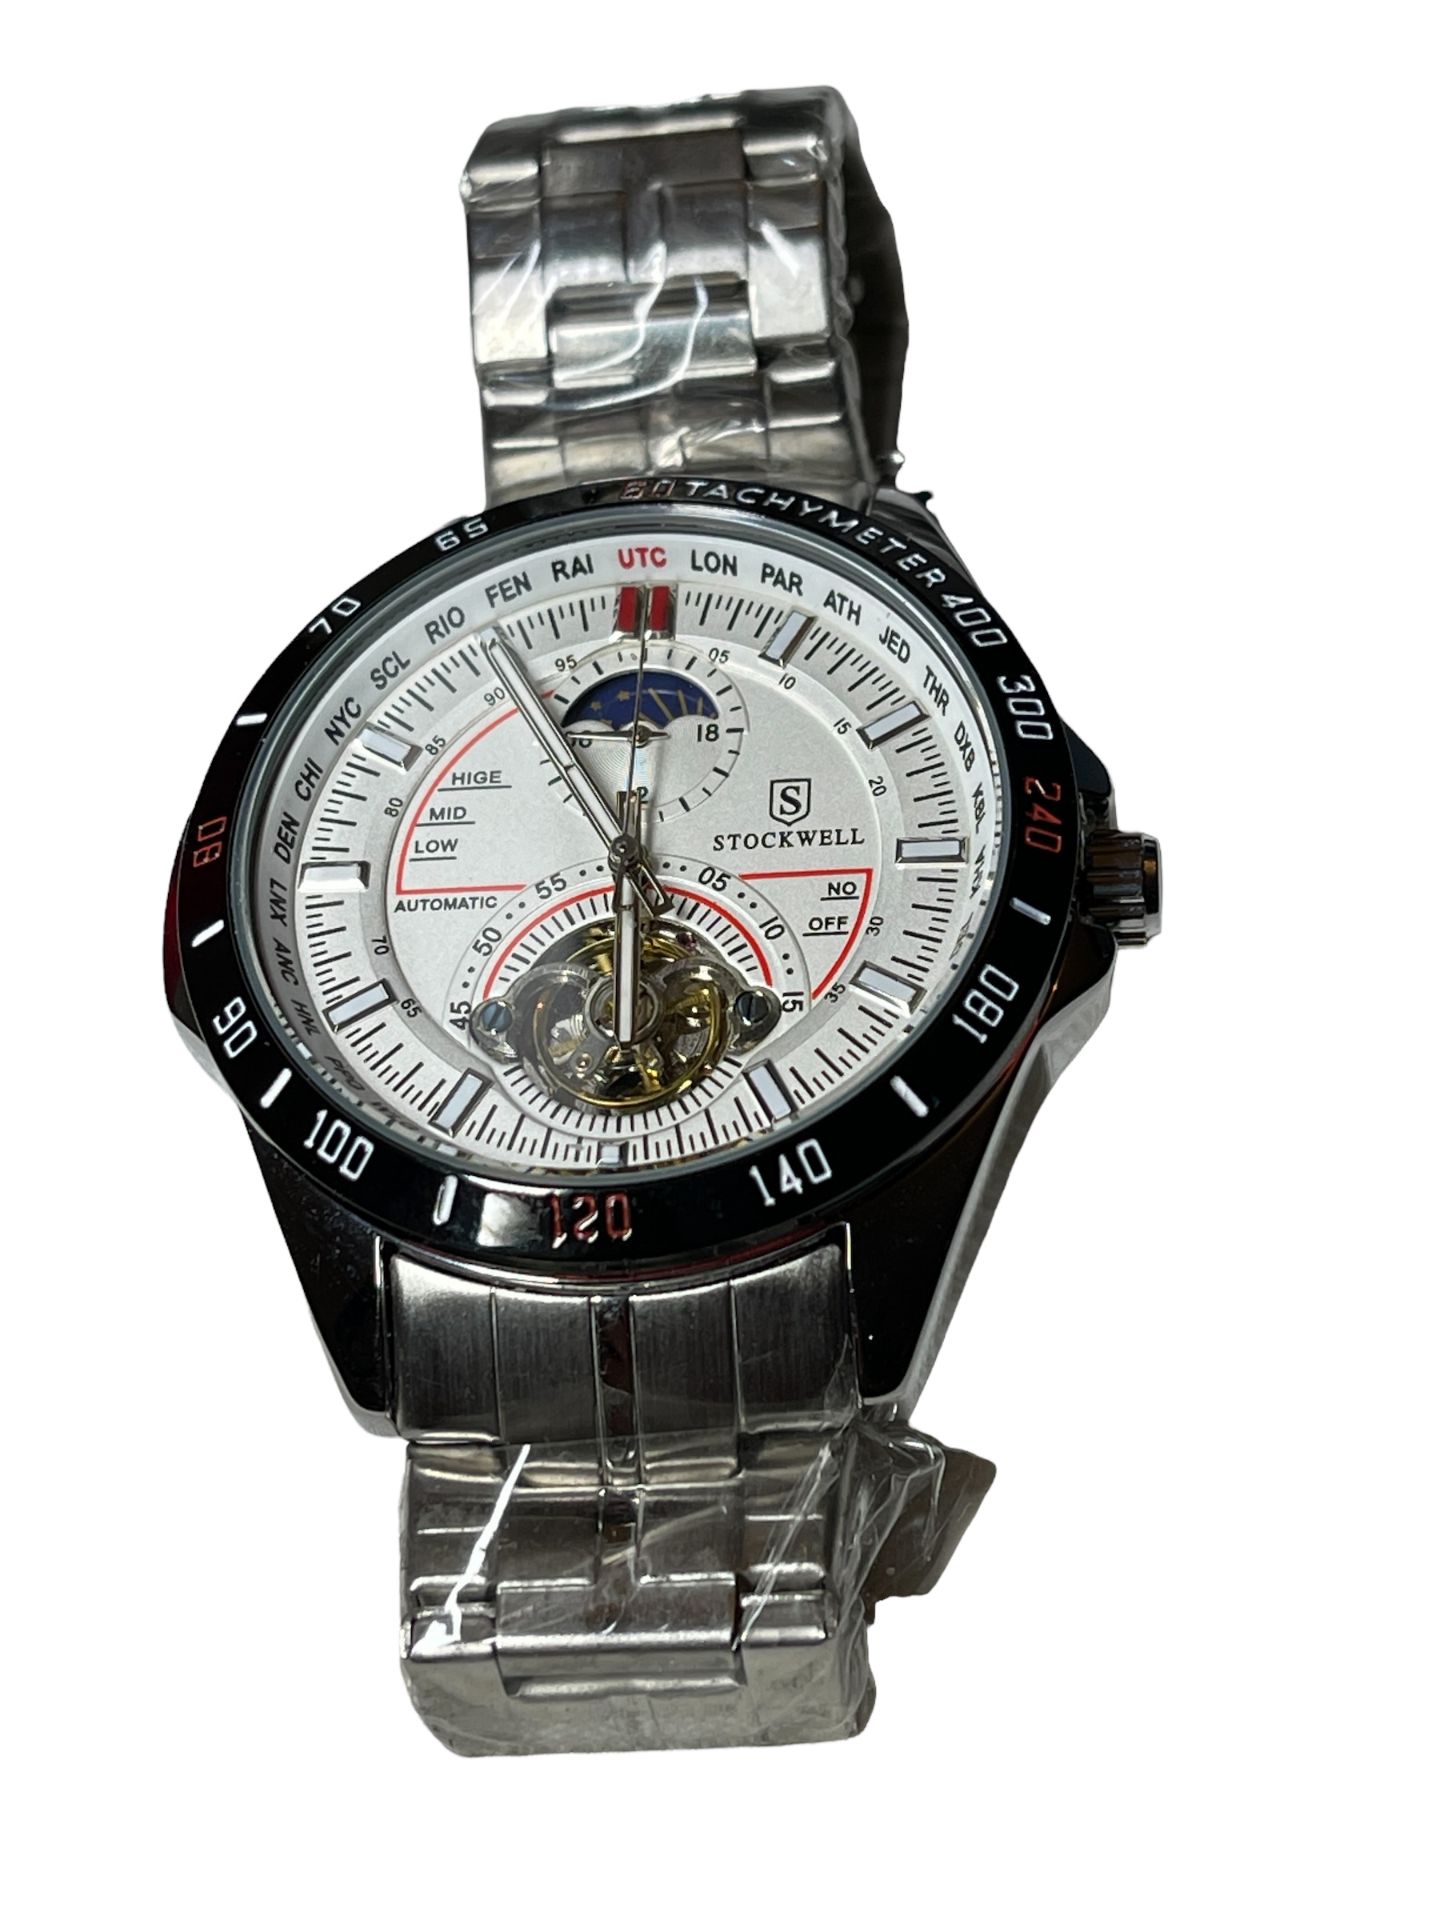 Stockwell Automatic Limited Edition Moon Chronograph Men Watch RRP £590 - Image 4 of 6